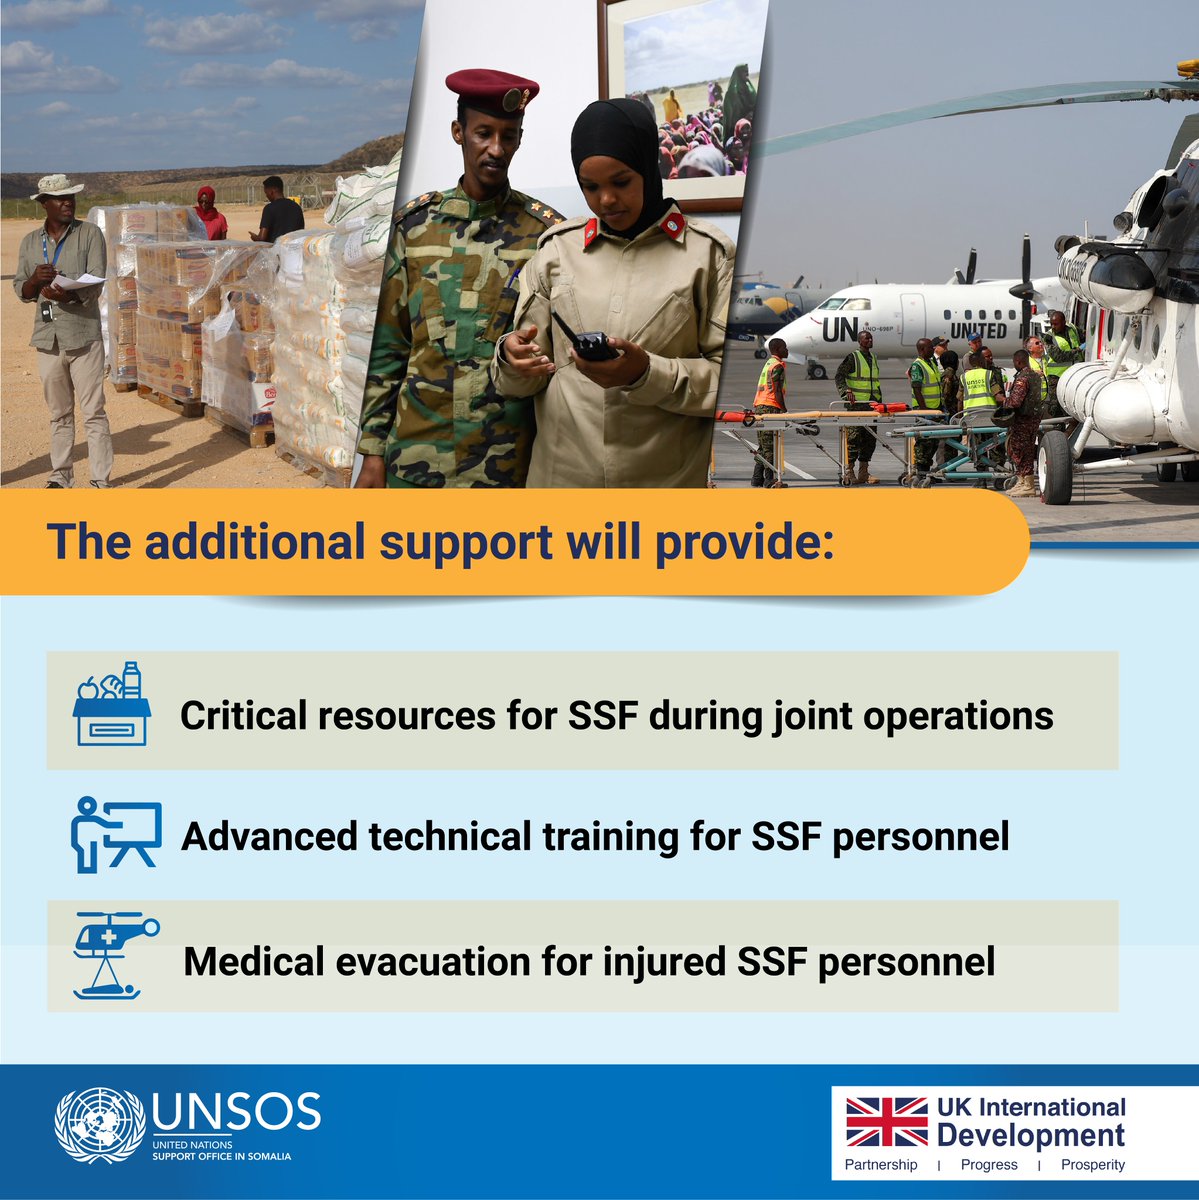 The latest round of @UKinSomalia support will help meet critical logistical needs of #SSF and enhance effective operations in stabilising #Somalia. This support not only strengthens the troops’ capabilities but also institutions to help restore peace, and respect for the rule